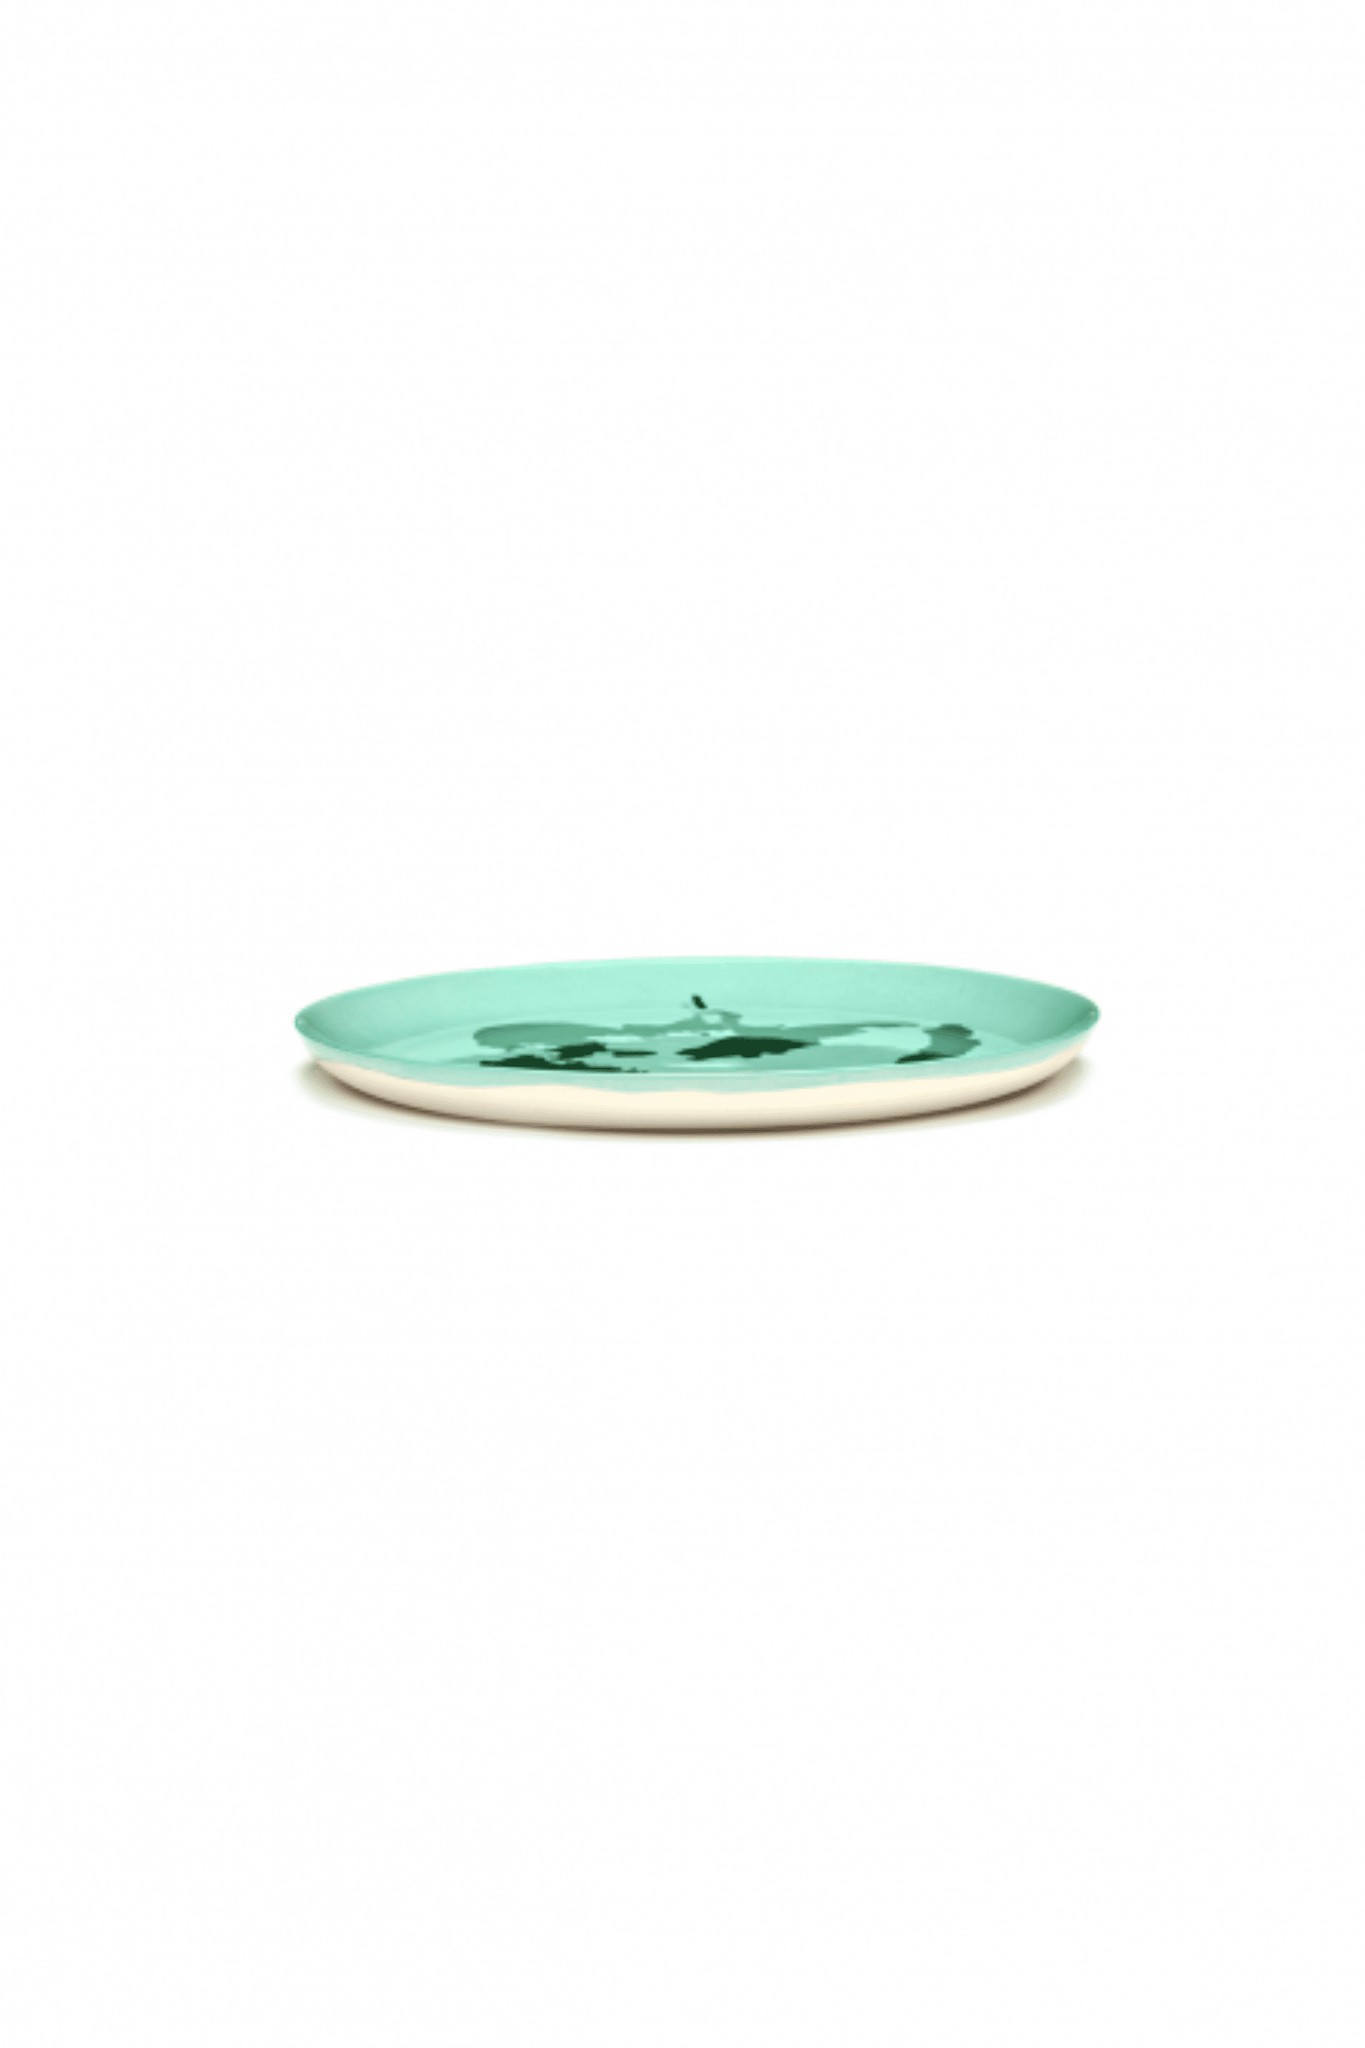 Set of 2 Large Plates, Azure with Green Pepper Ottolenghi Serax, front view